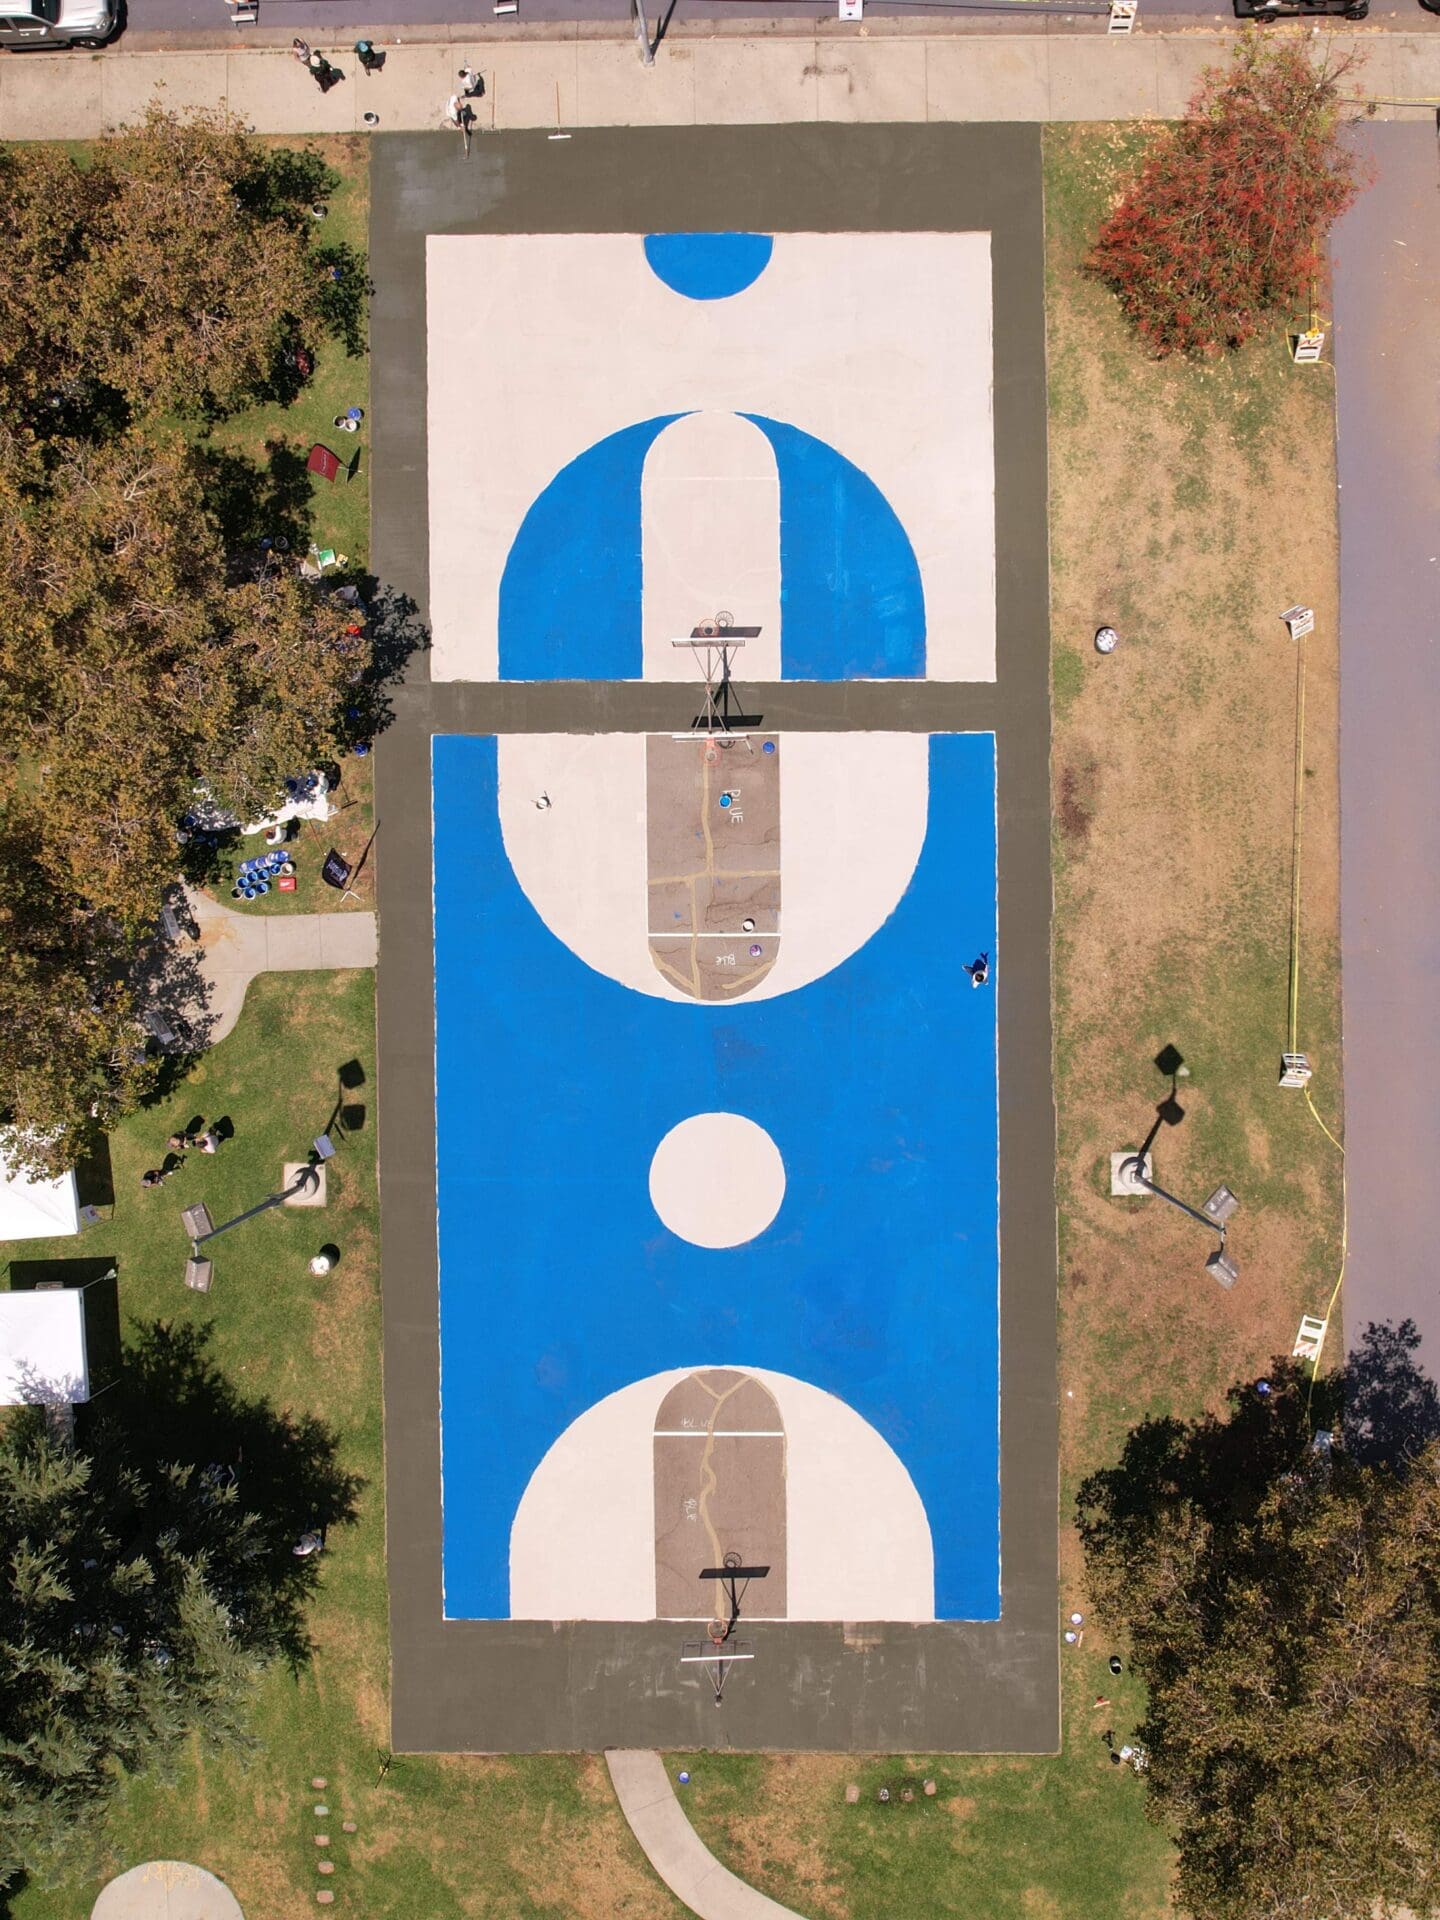 The LA neighbourhood using reflective paint to tackle rising temperatures | An aerial view of a basketball court in Pacoima, Los Angeles, with views of the blue and white mural painted on its surface with reflective paint